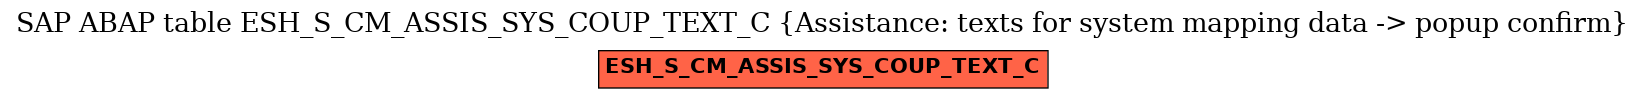 E-R Diagram for table ESH_S_CM_ASSIS_SYS_COUP_TEXT_C (Assistance: texts for system mapping data -> popup confirm)